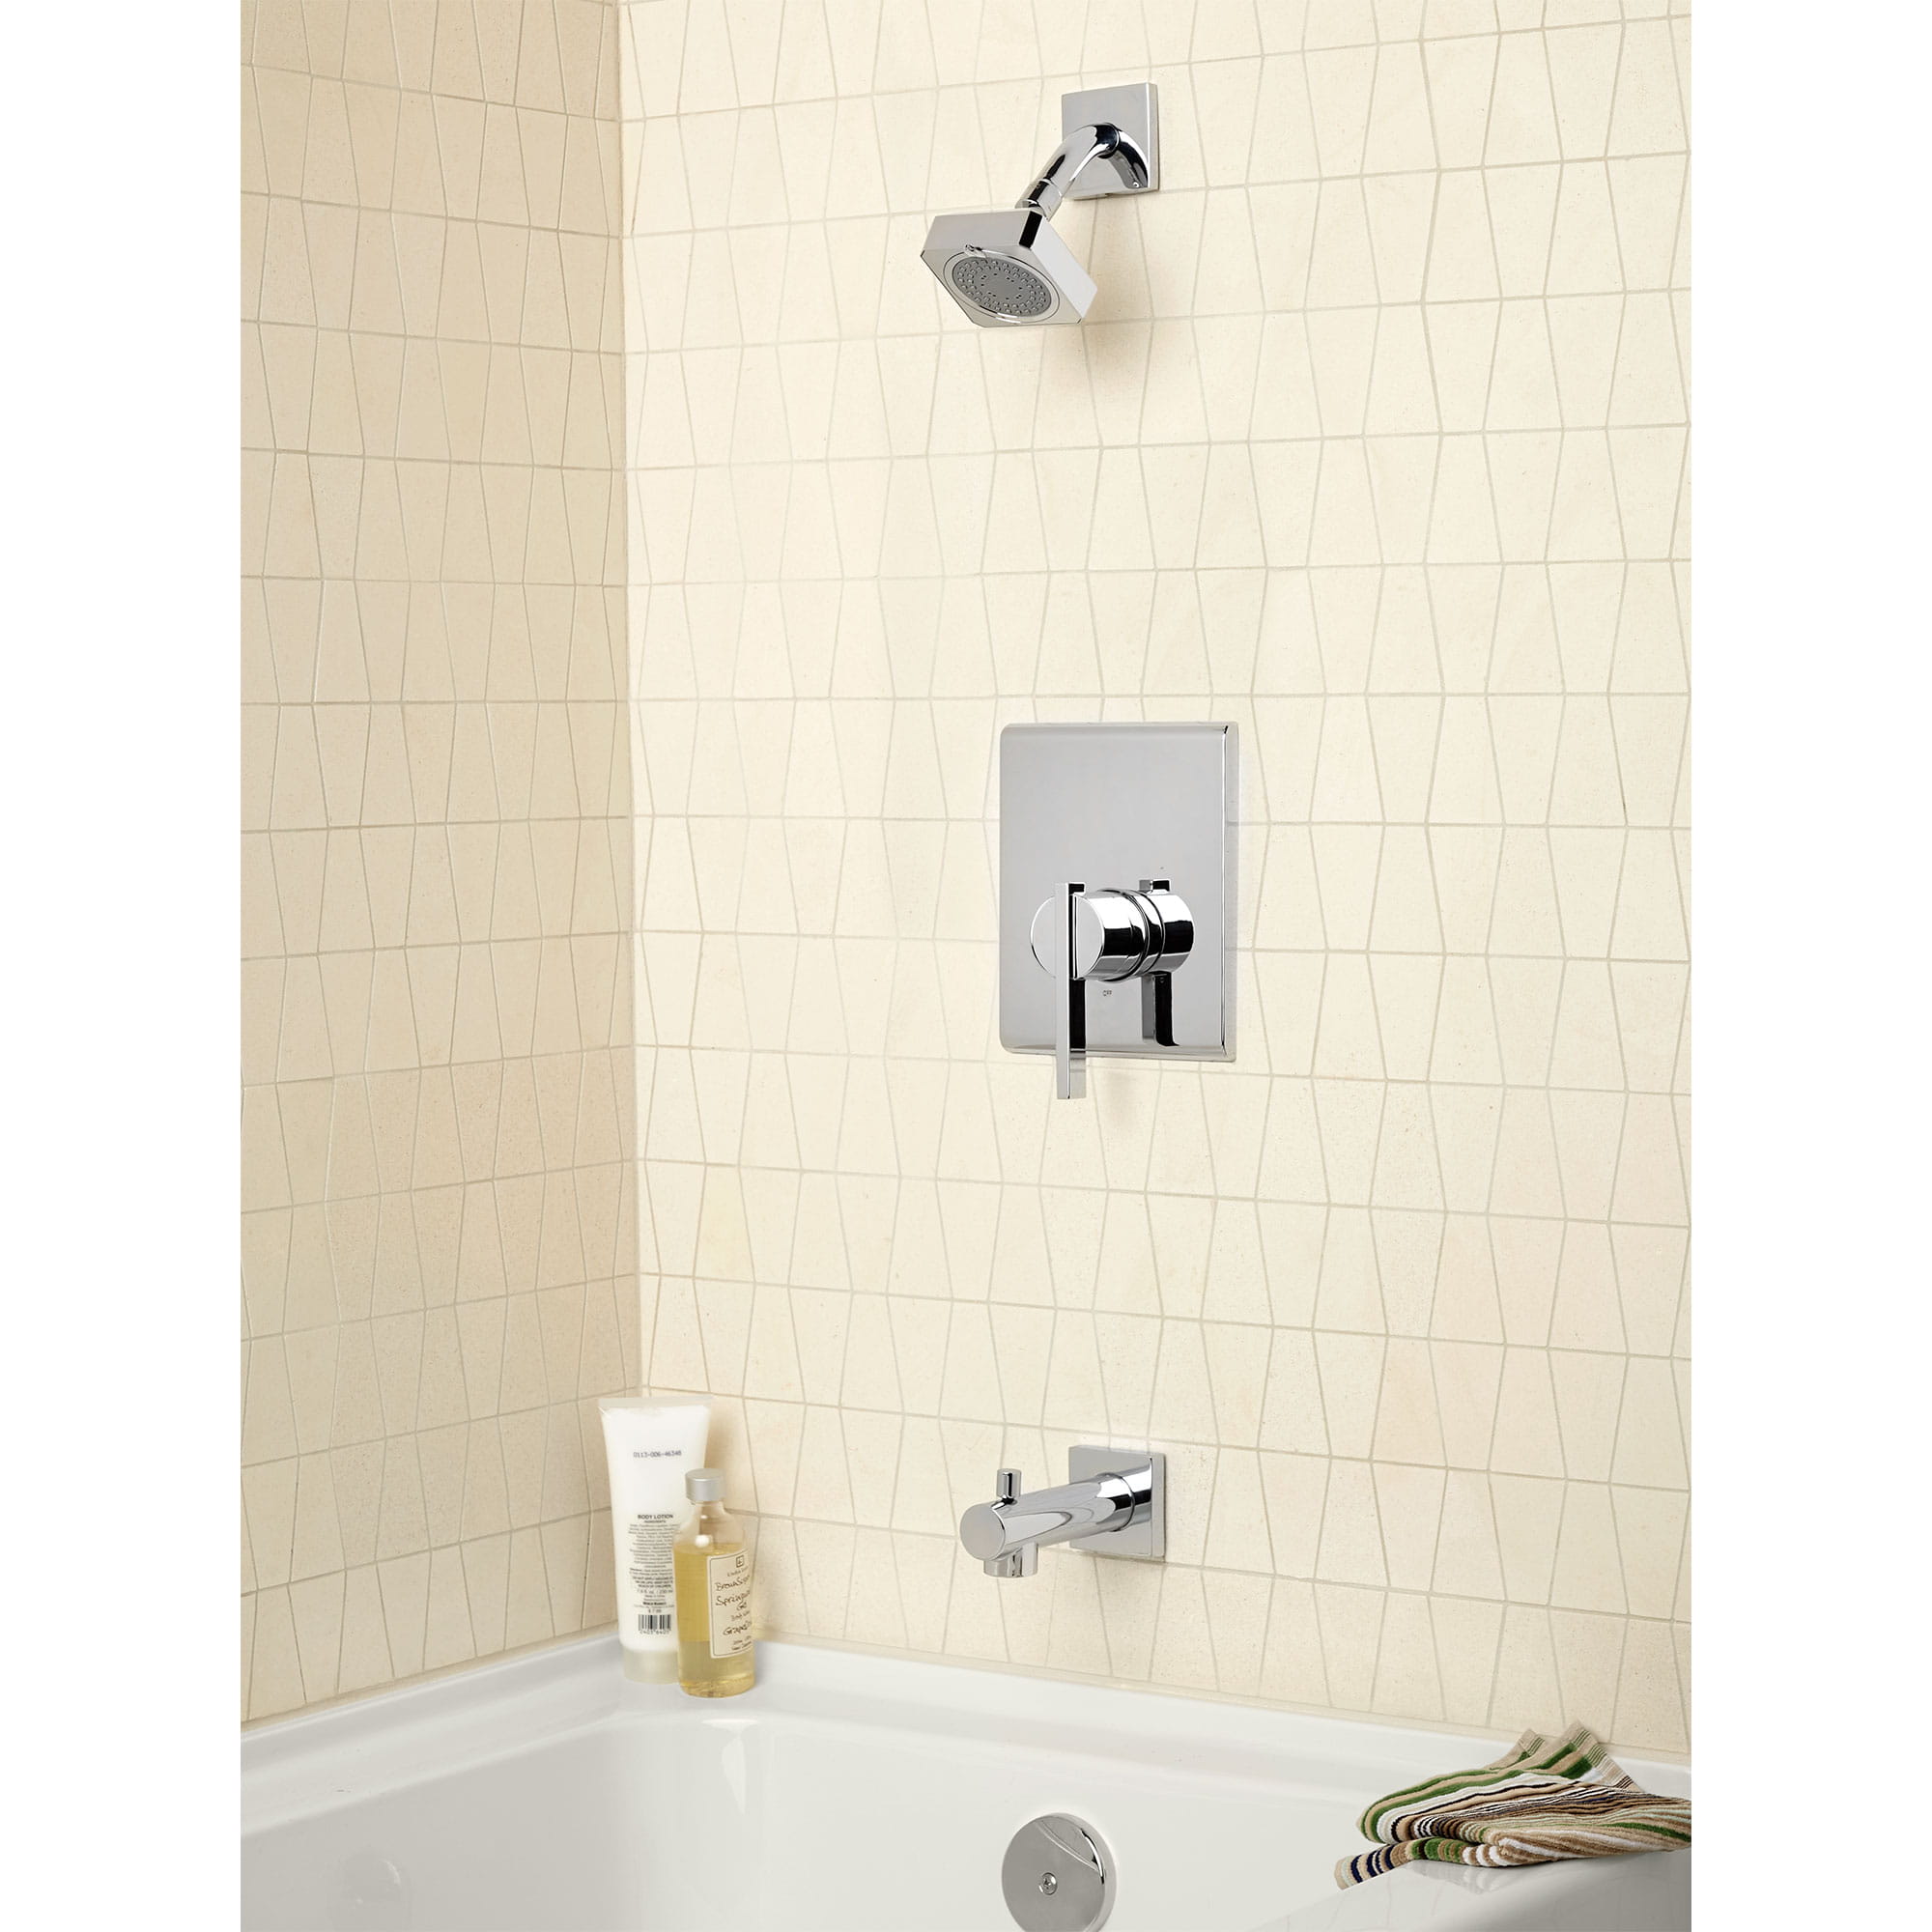 Times Square 20 GPM Tub and Shower Trim Kit with FloWise Showerhead and Lever Handle CHROME